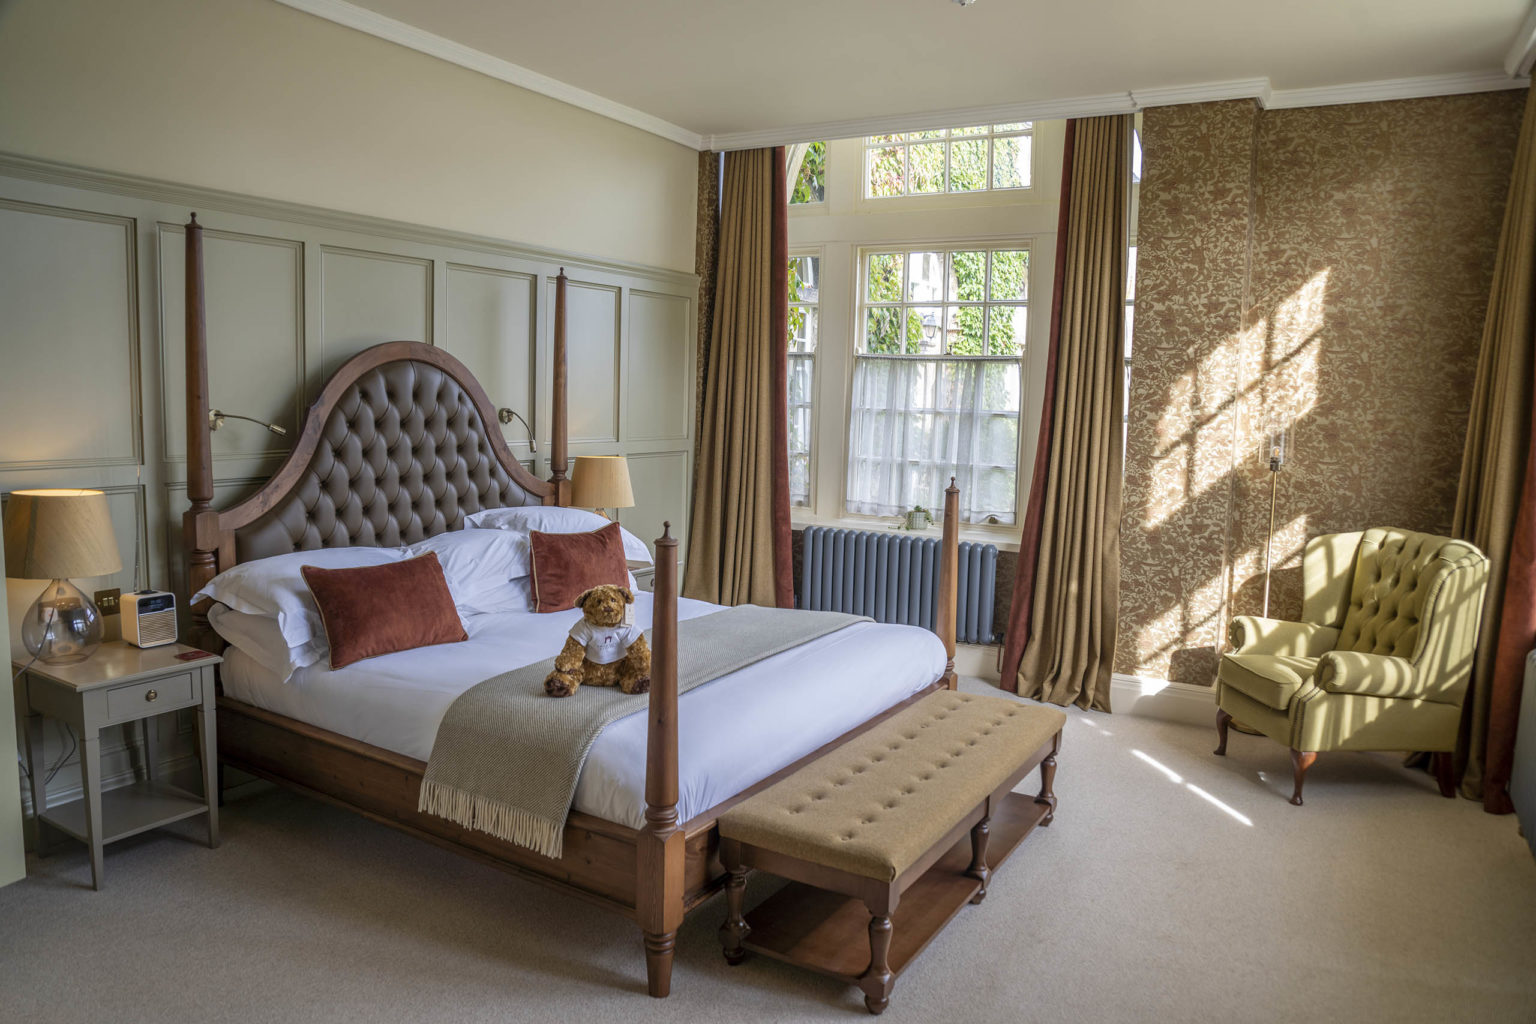 The bedroom of Colsterdale Suite accommodation at Swinton Park Hotel in North Yorkshire